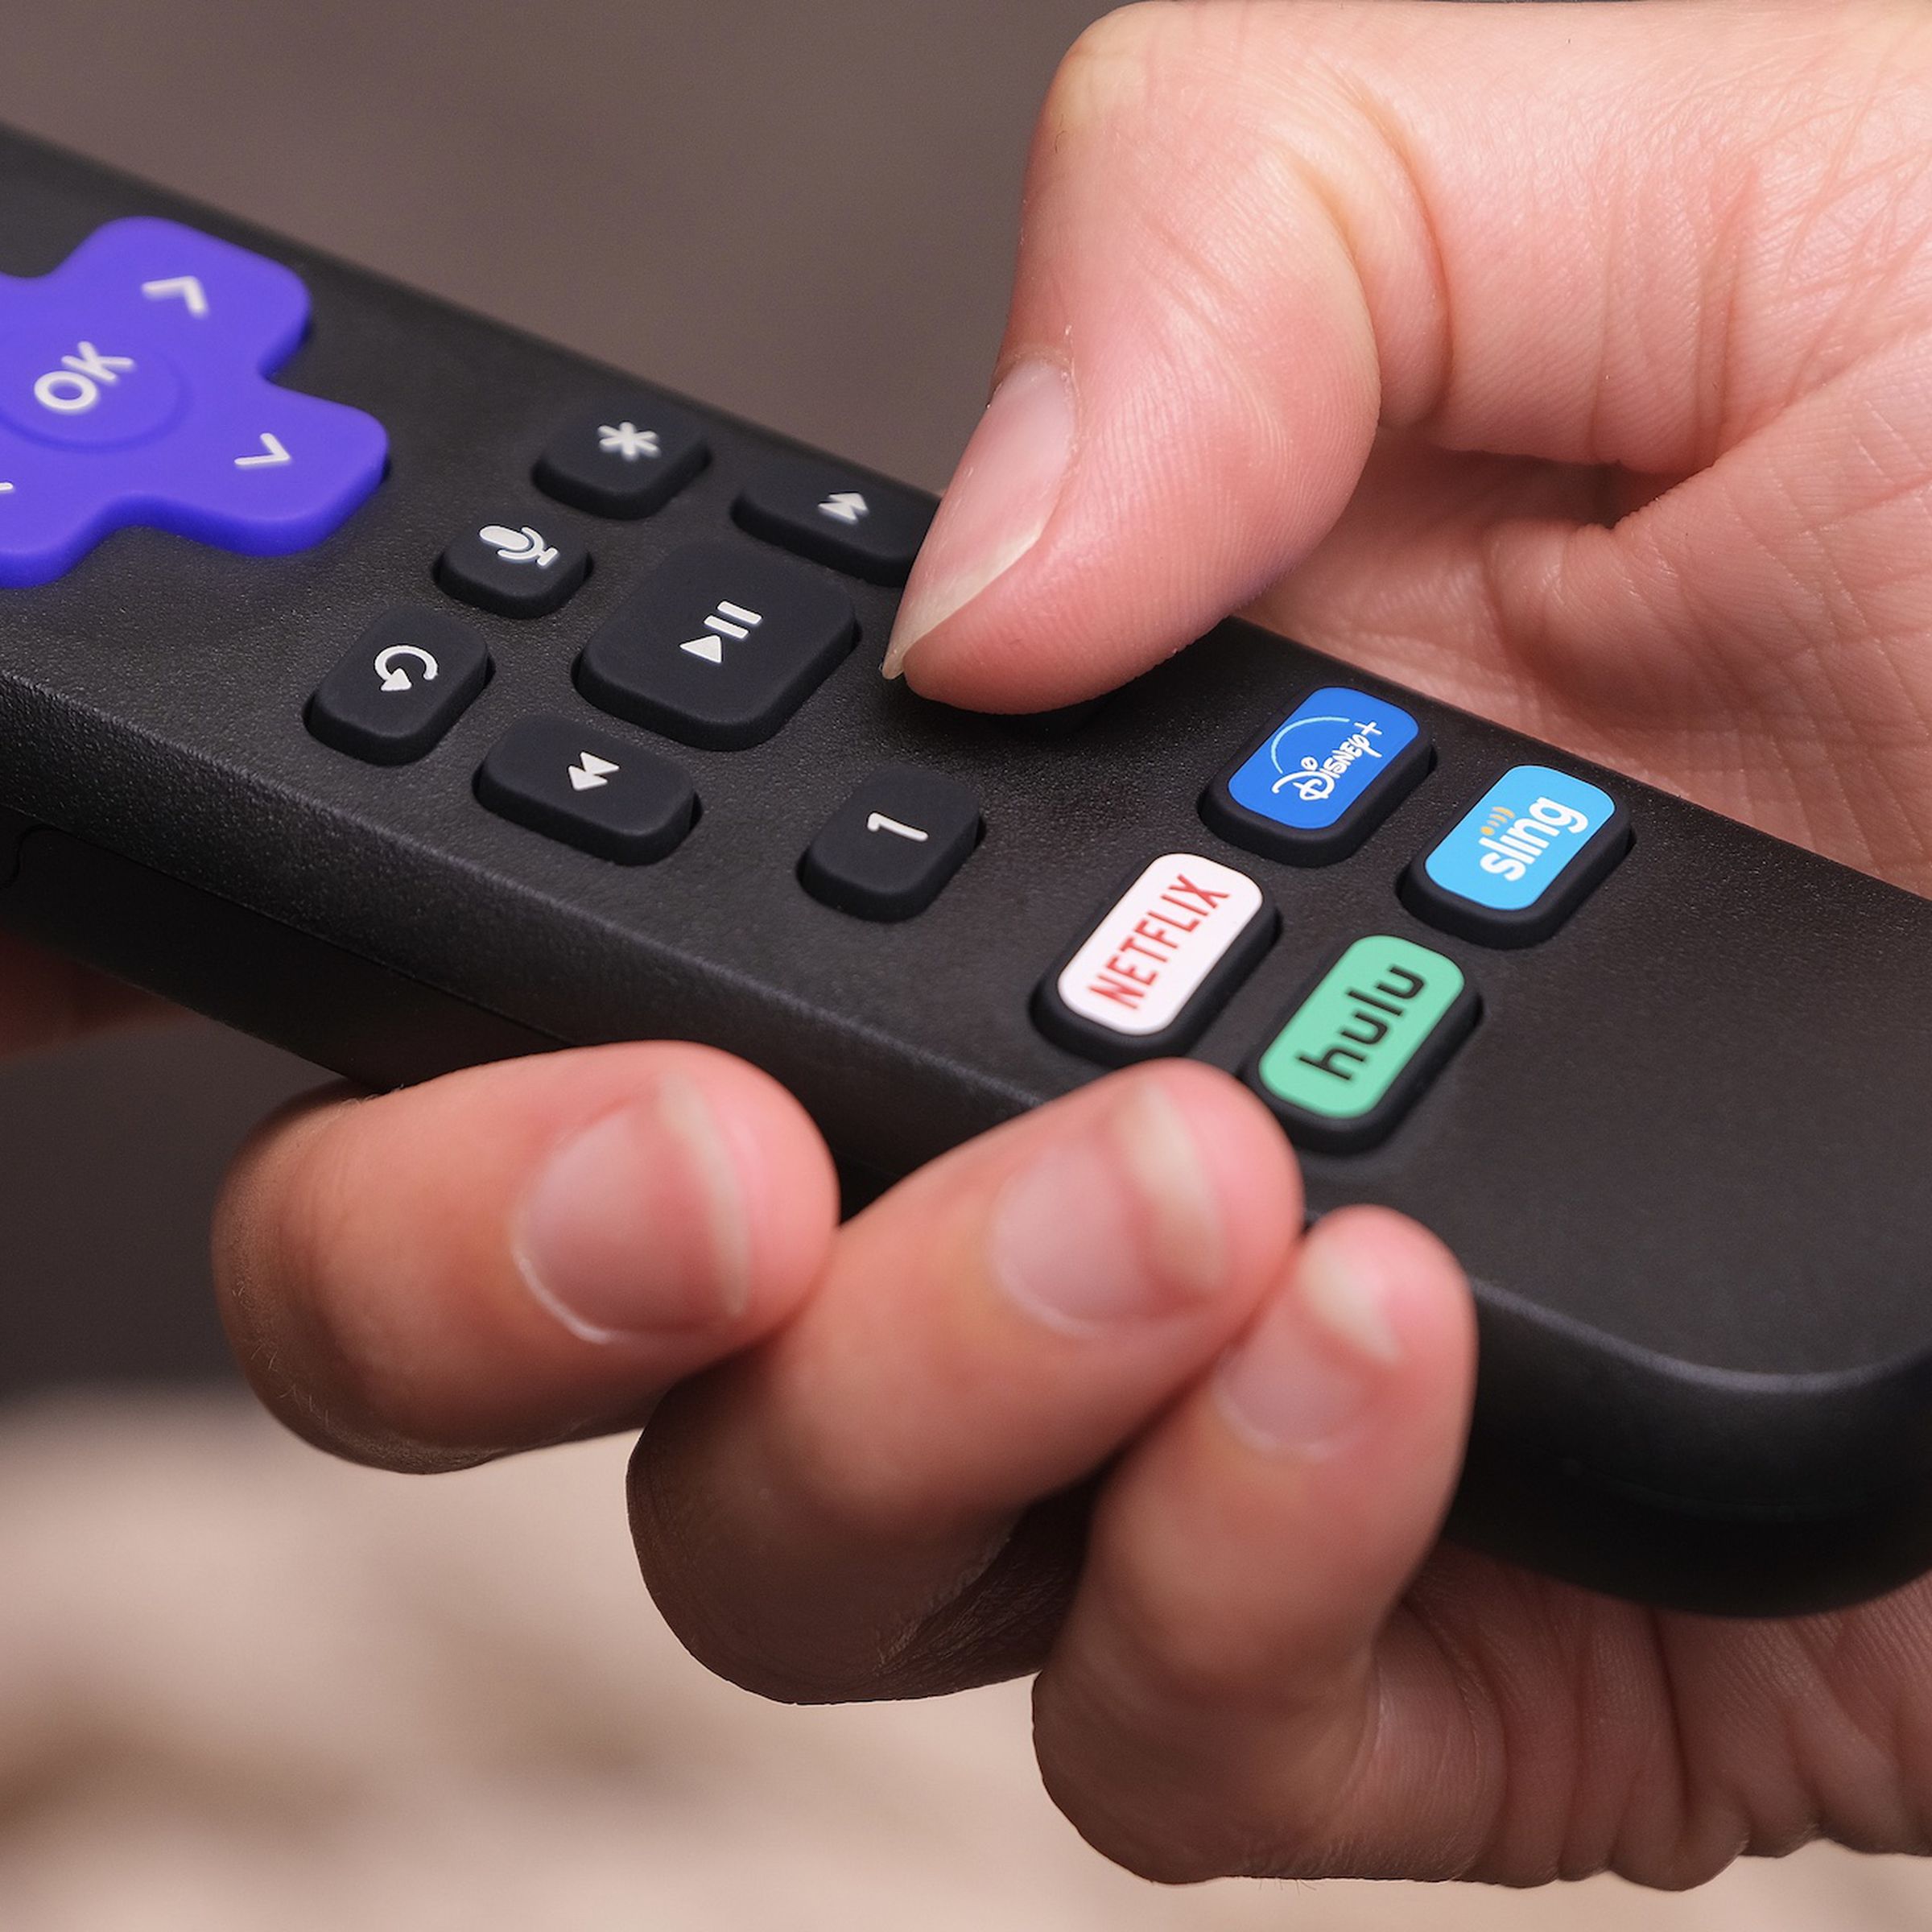 A photo of a Roku remote in a person’s hand.